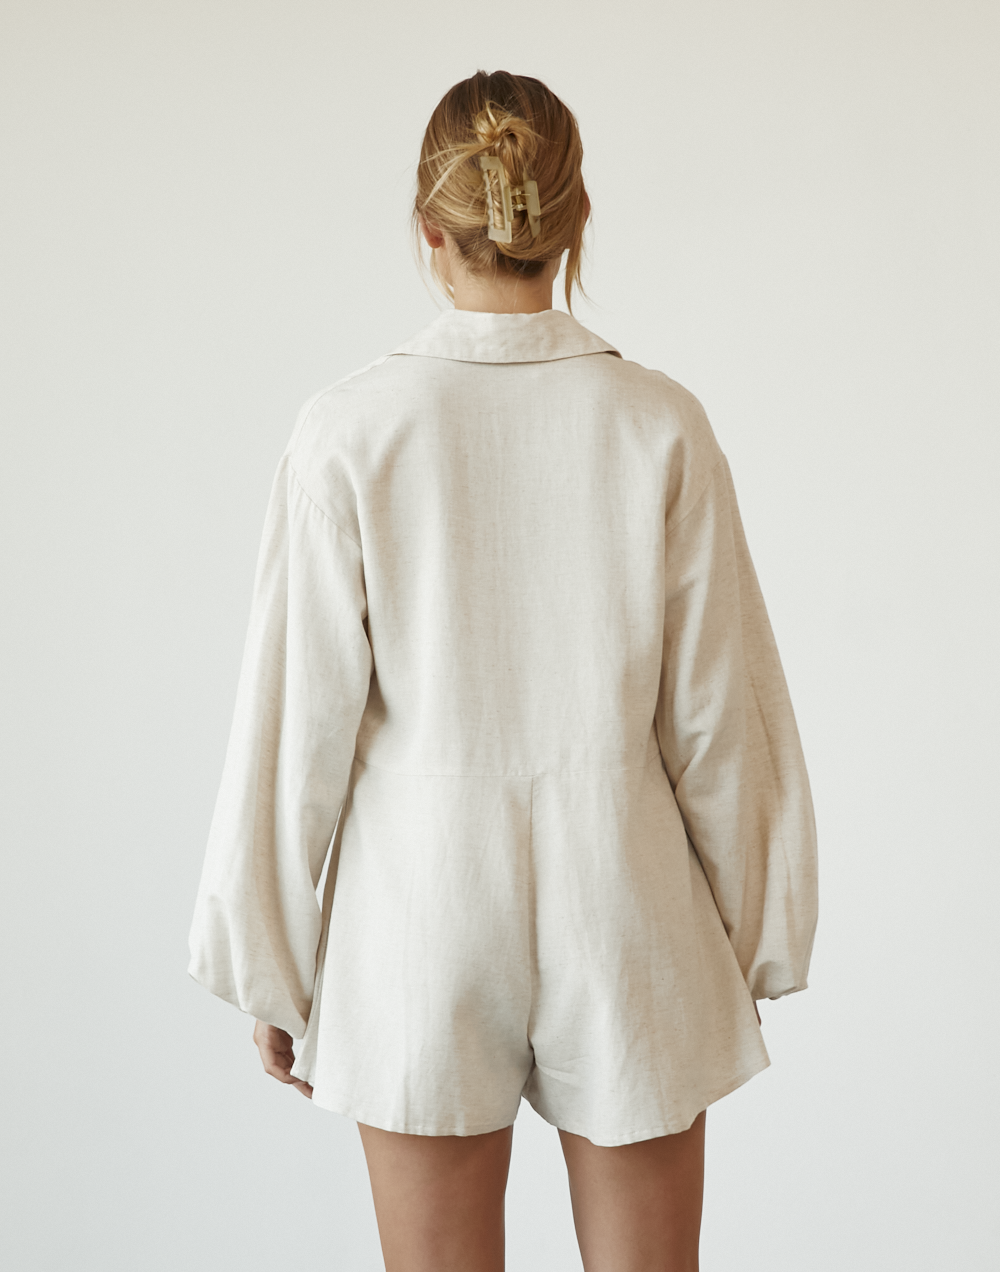 Take Your Time Playsuit (Beige) - Long Sleeved Linen Playsuit - Women's Playsuit - Charcoal Clothing